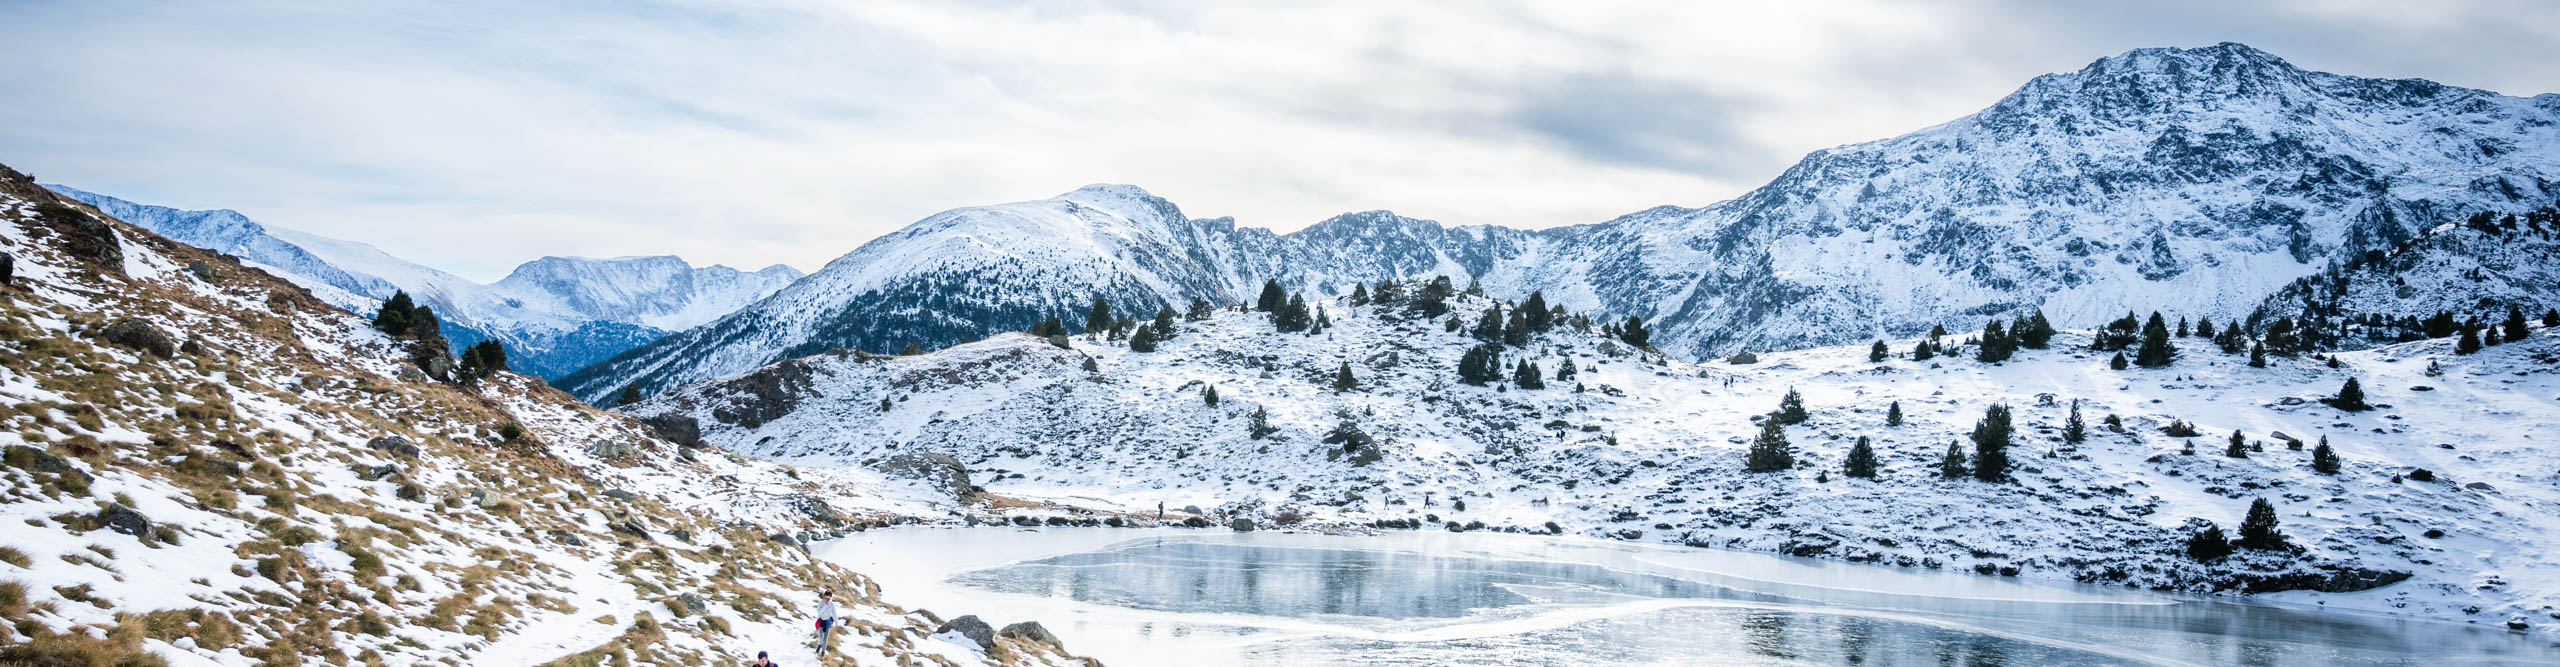 Snow-covered Tristaina lakes, located in the mountains of Ordino, in Andorra.